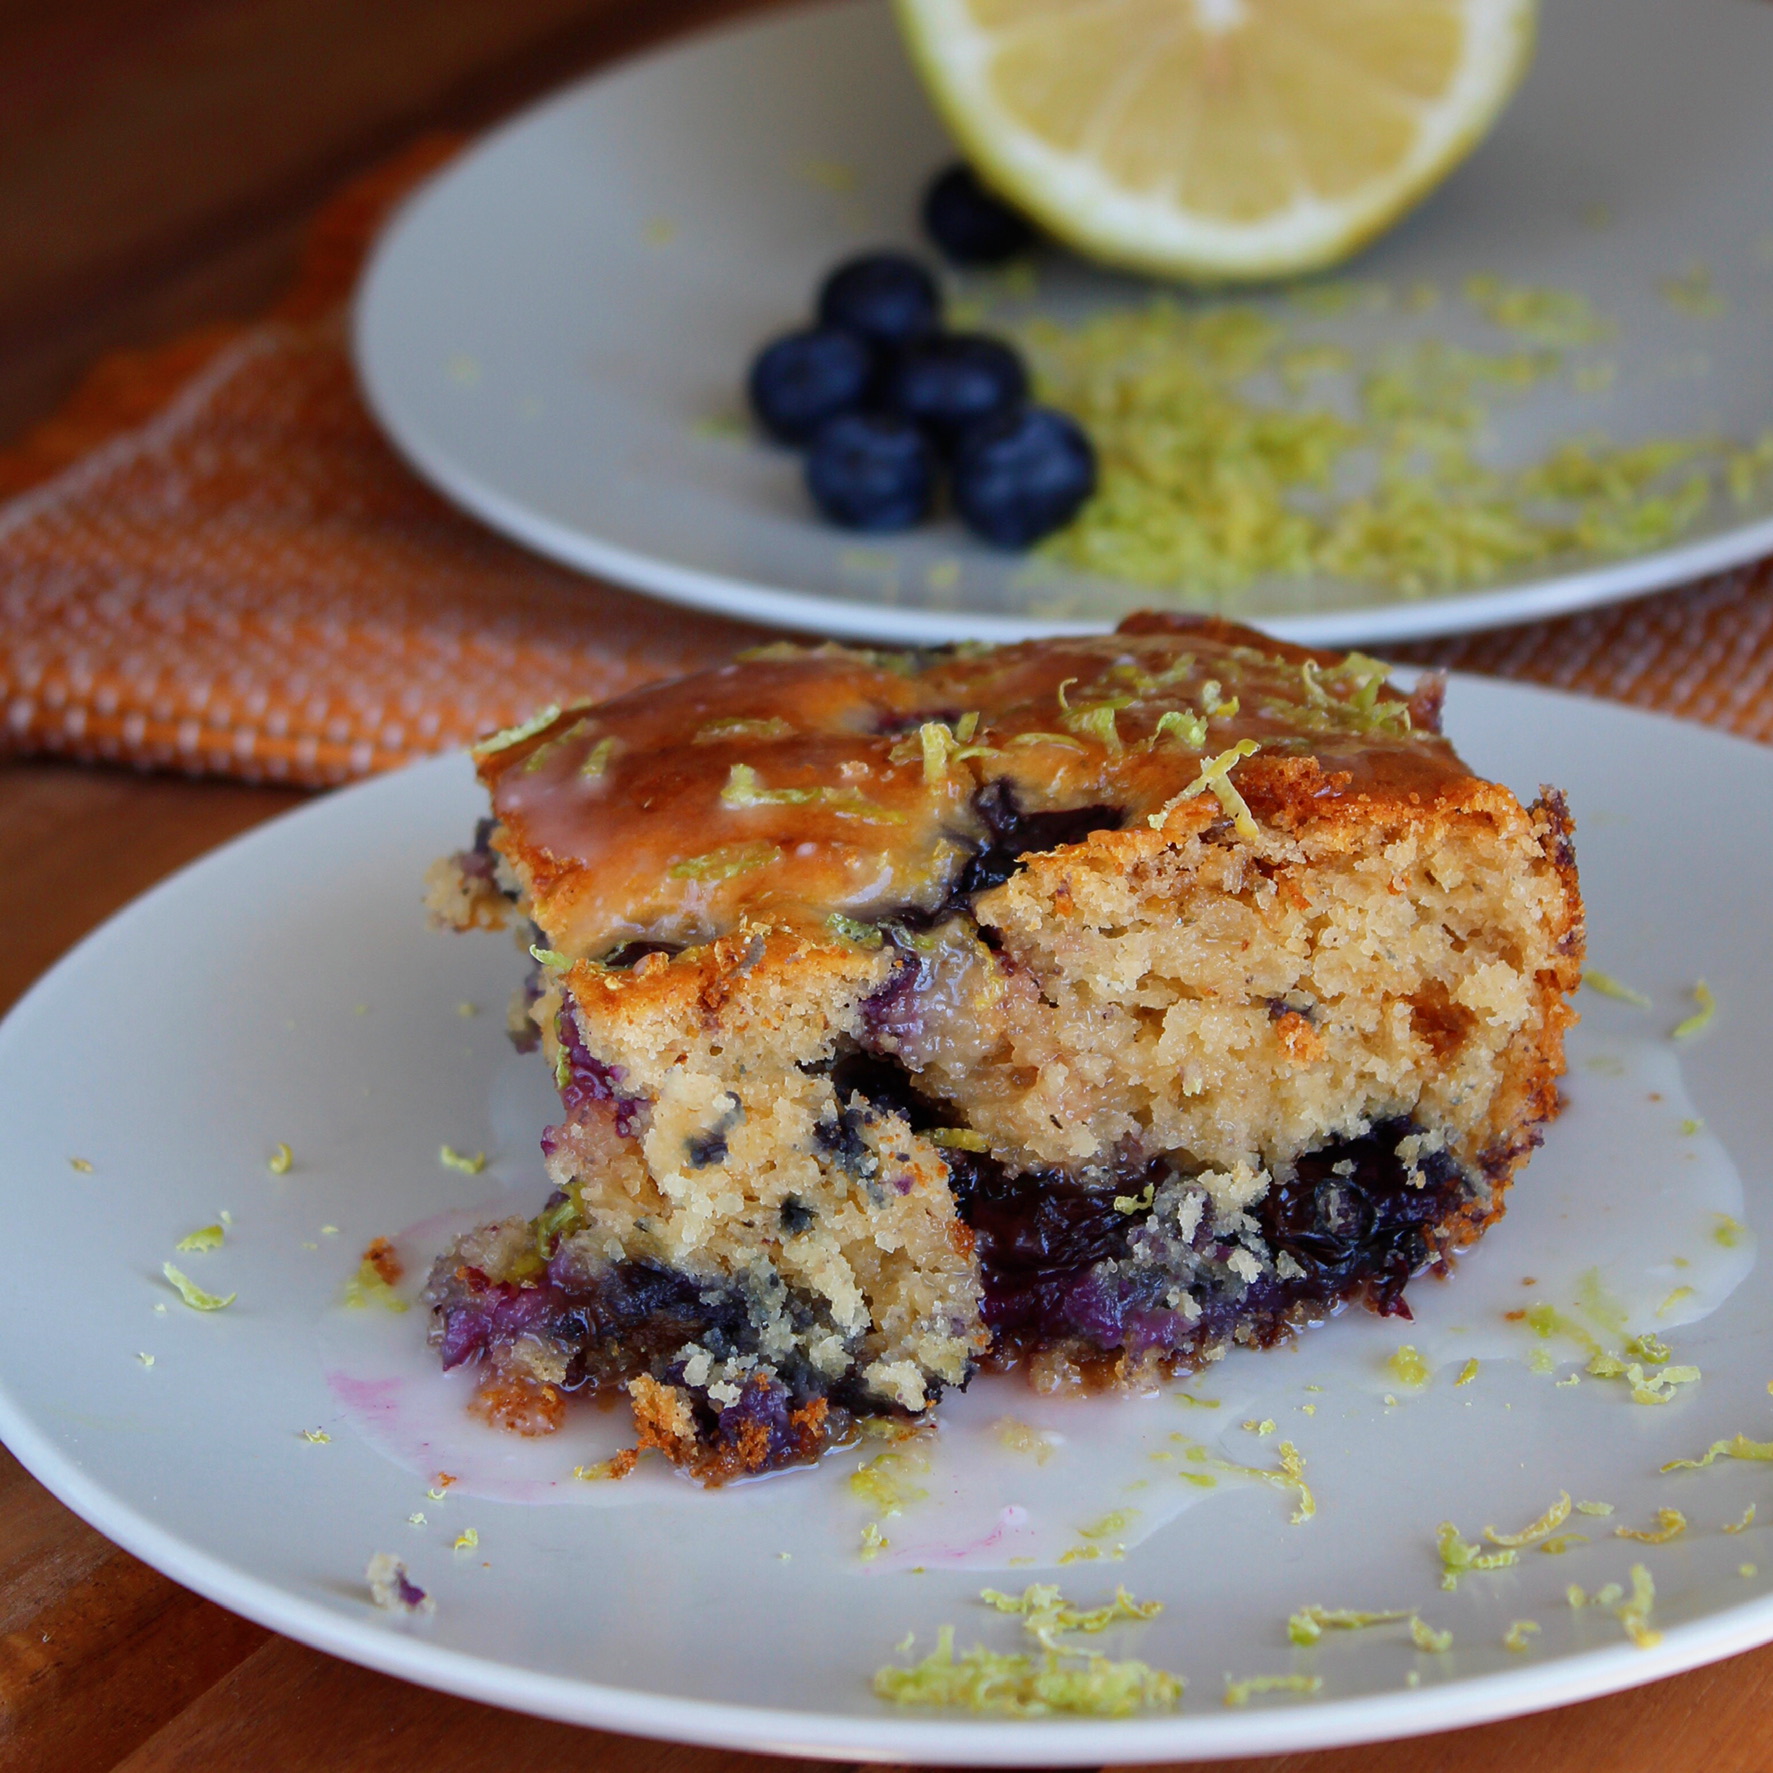 <p>This fresh and vibrant lemon yogurt cake is bursting with a layer of juicy blueberries. Allrecipes Allstar Buckwheat Queen gave this cake top marks: "I loved this cake. It's tender, moist, and full of flavor. I topped it with a powdered sugar and lemon juice glaze."</p>
                          